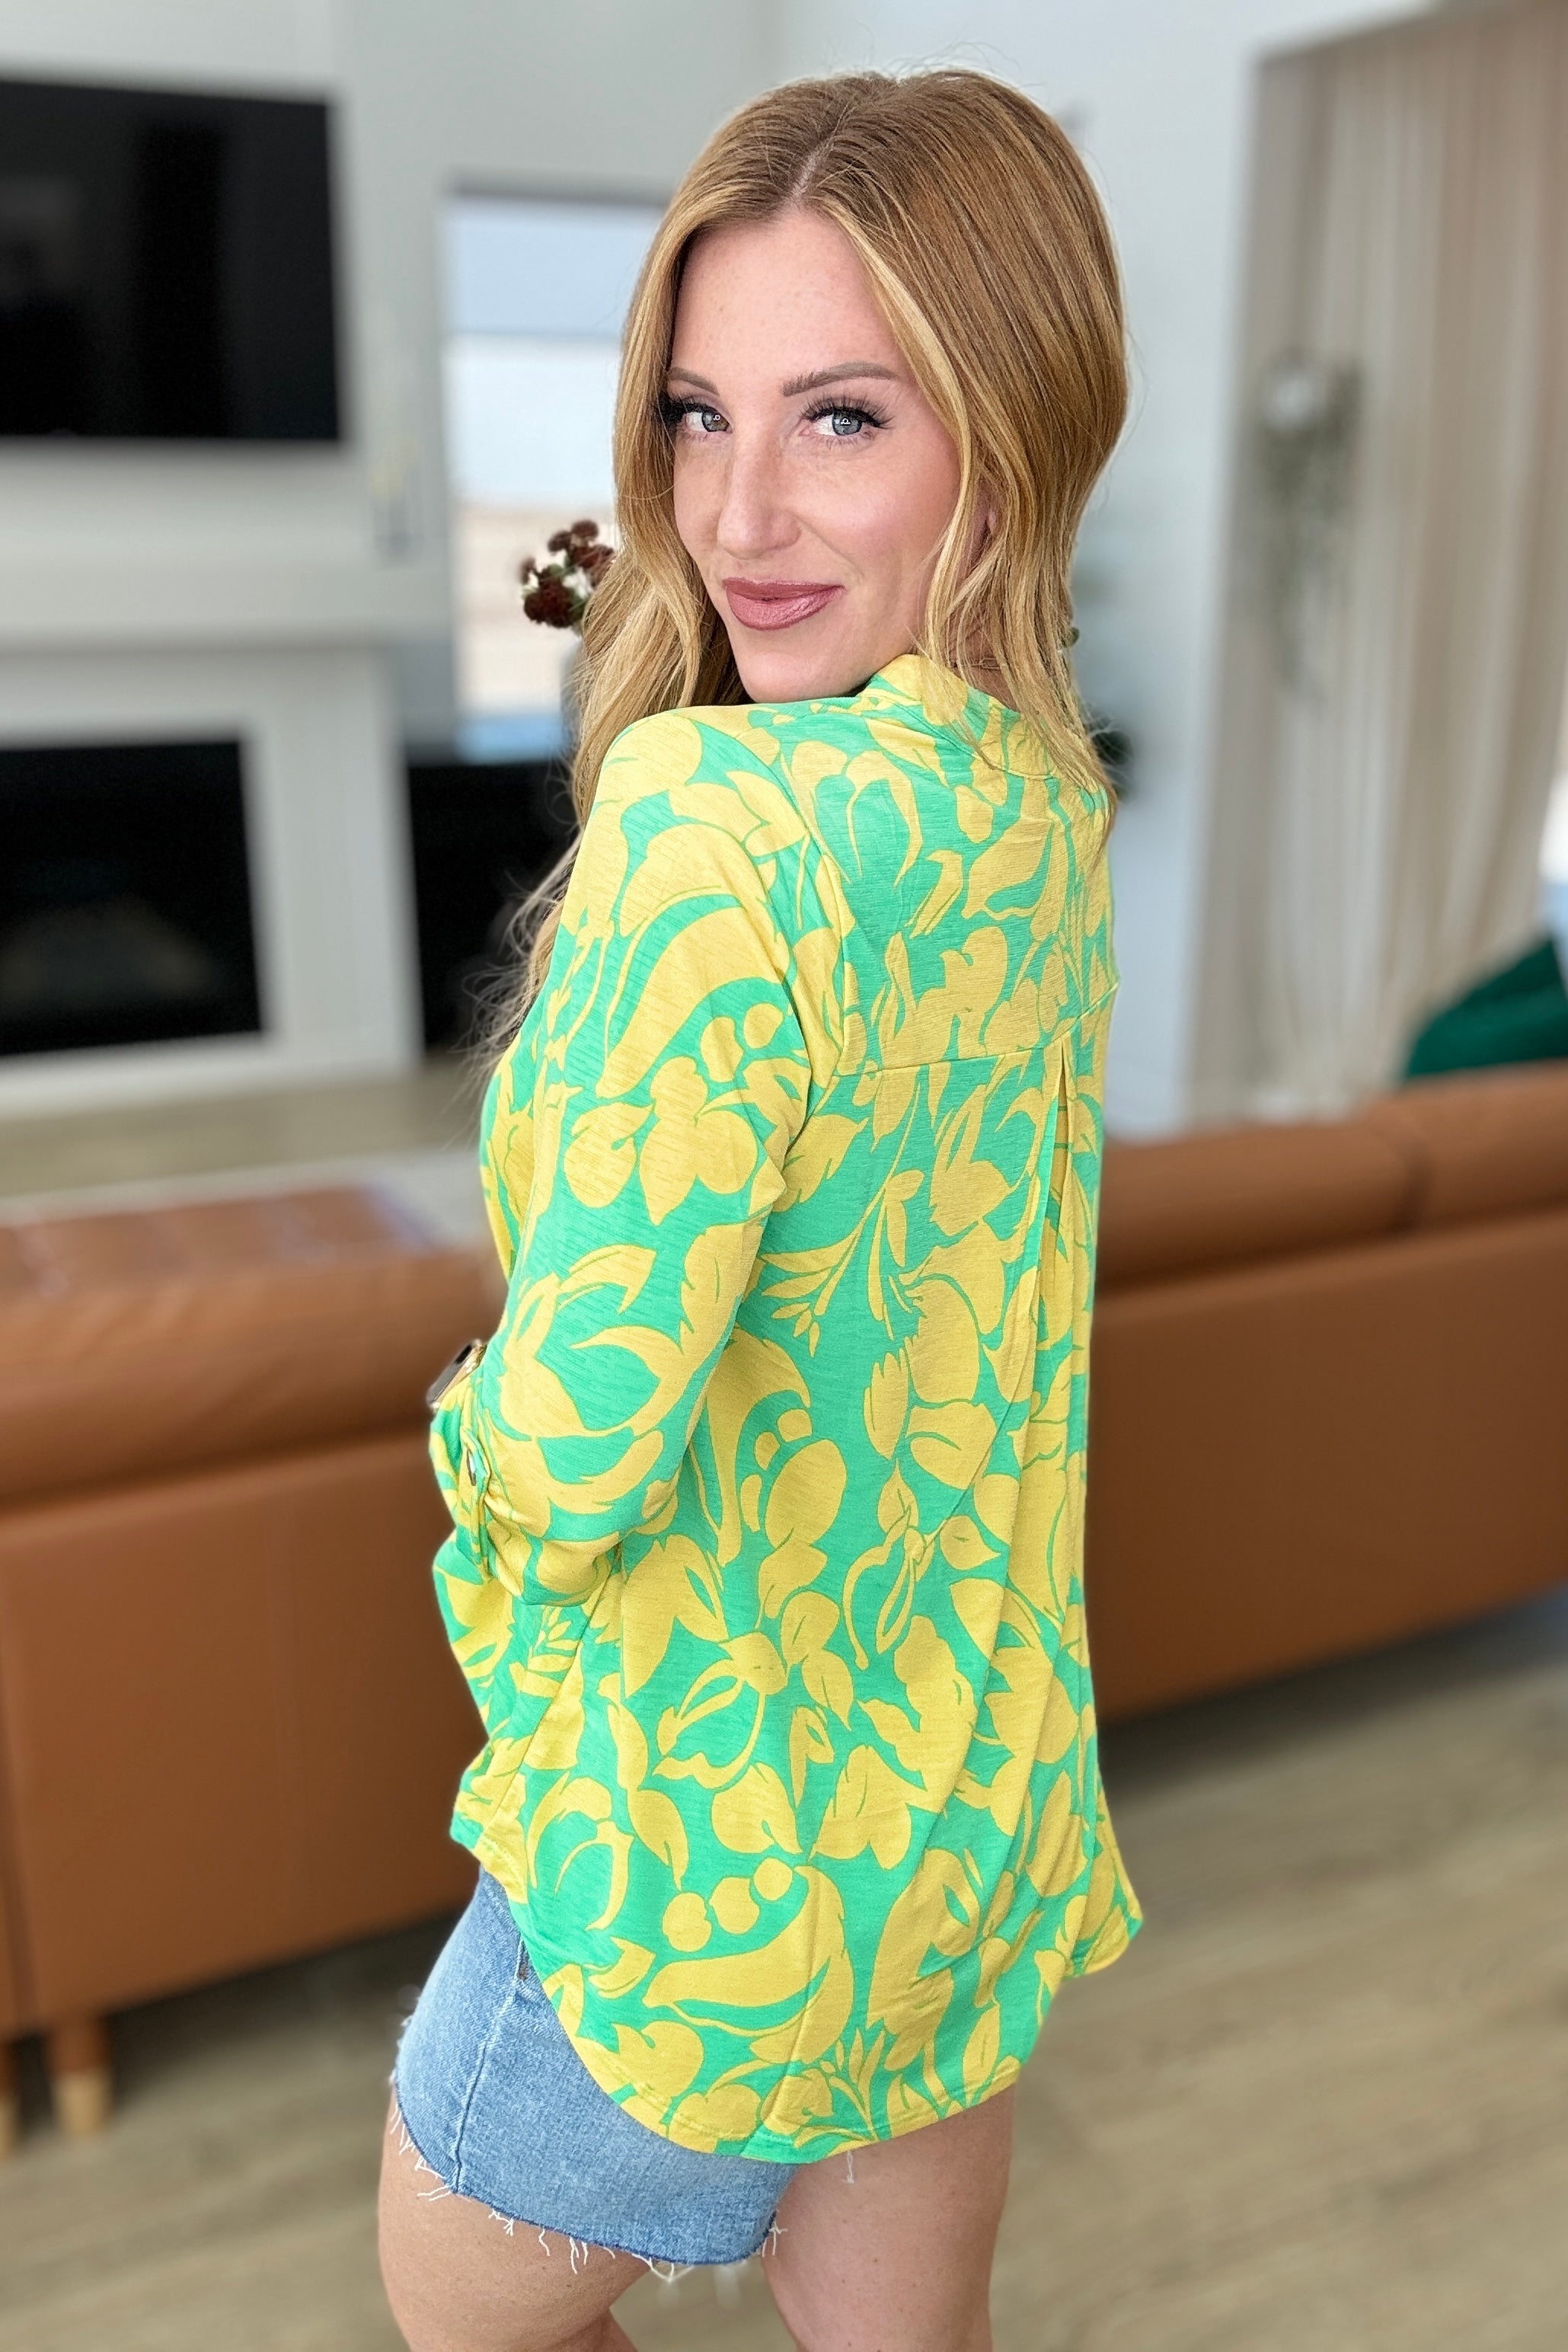 Lizzy Top in Kelly Green and Yellow Floral-Short Sleeves-Ave Shops-Urban Threadz Boutique, Women's Fashion Boutique in Saugatuck, MI